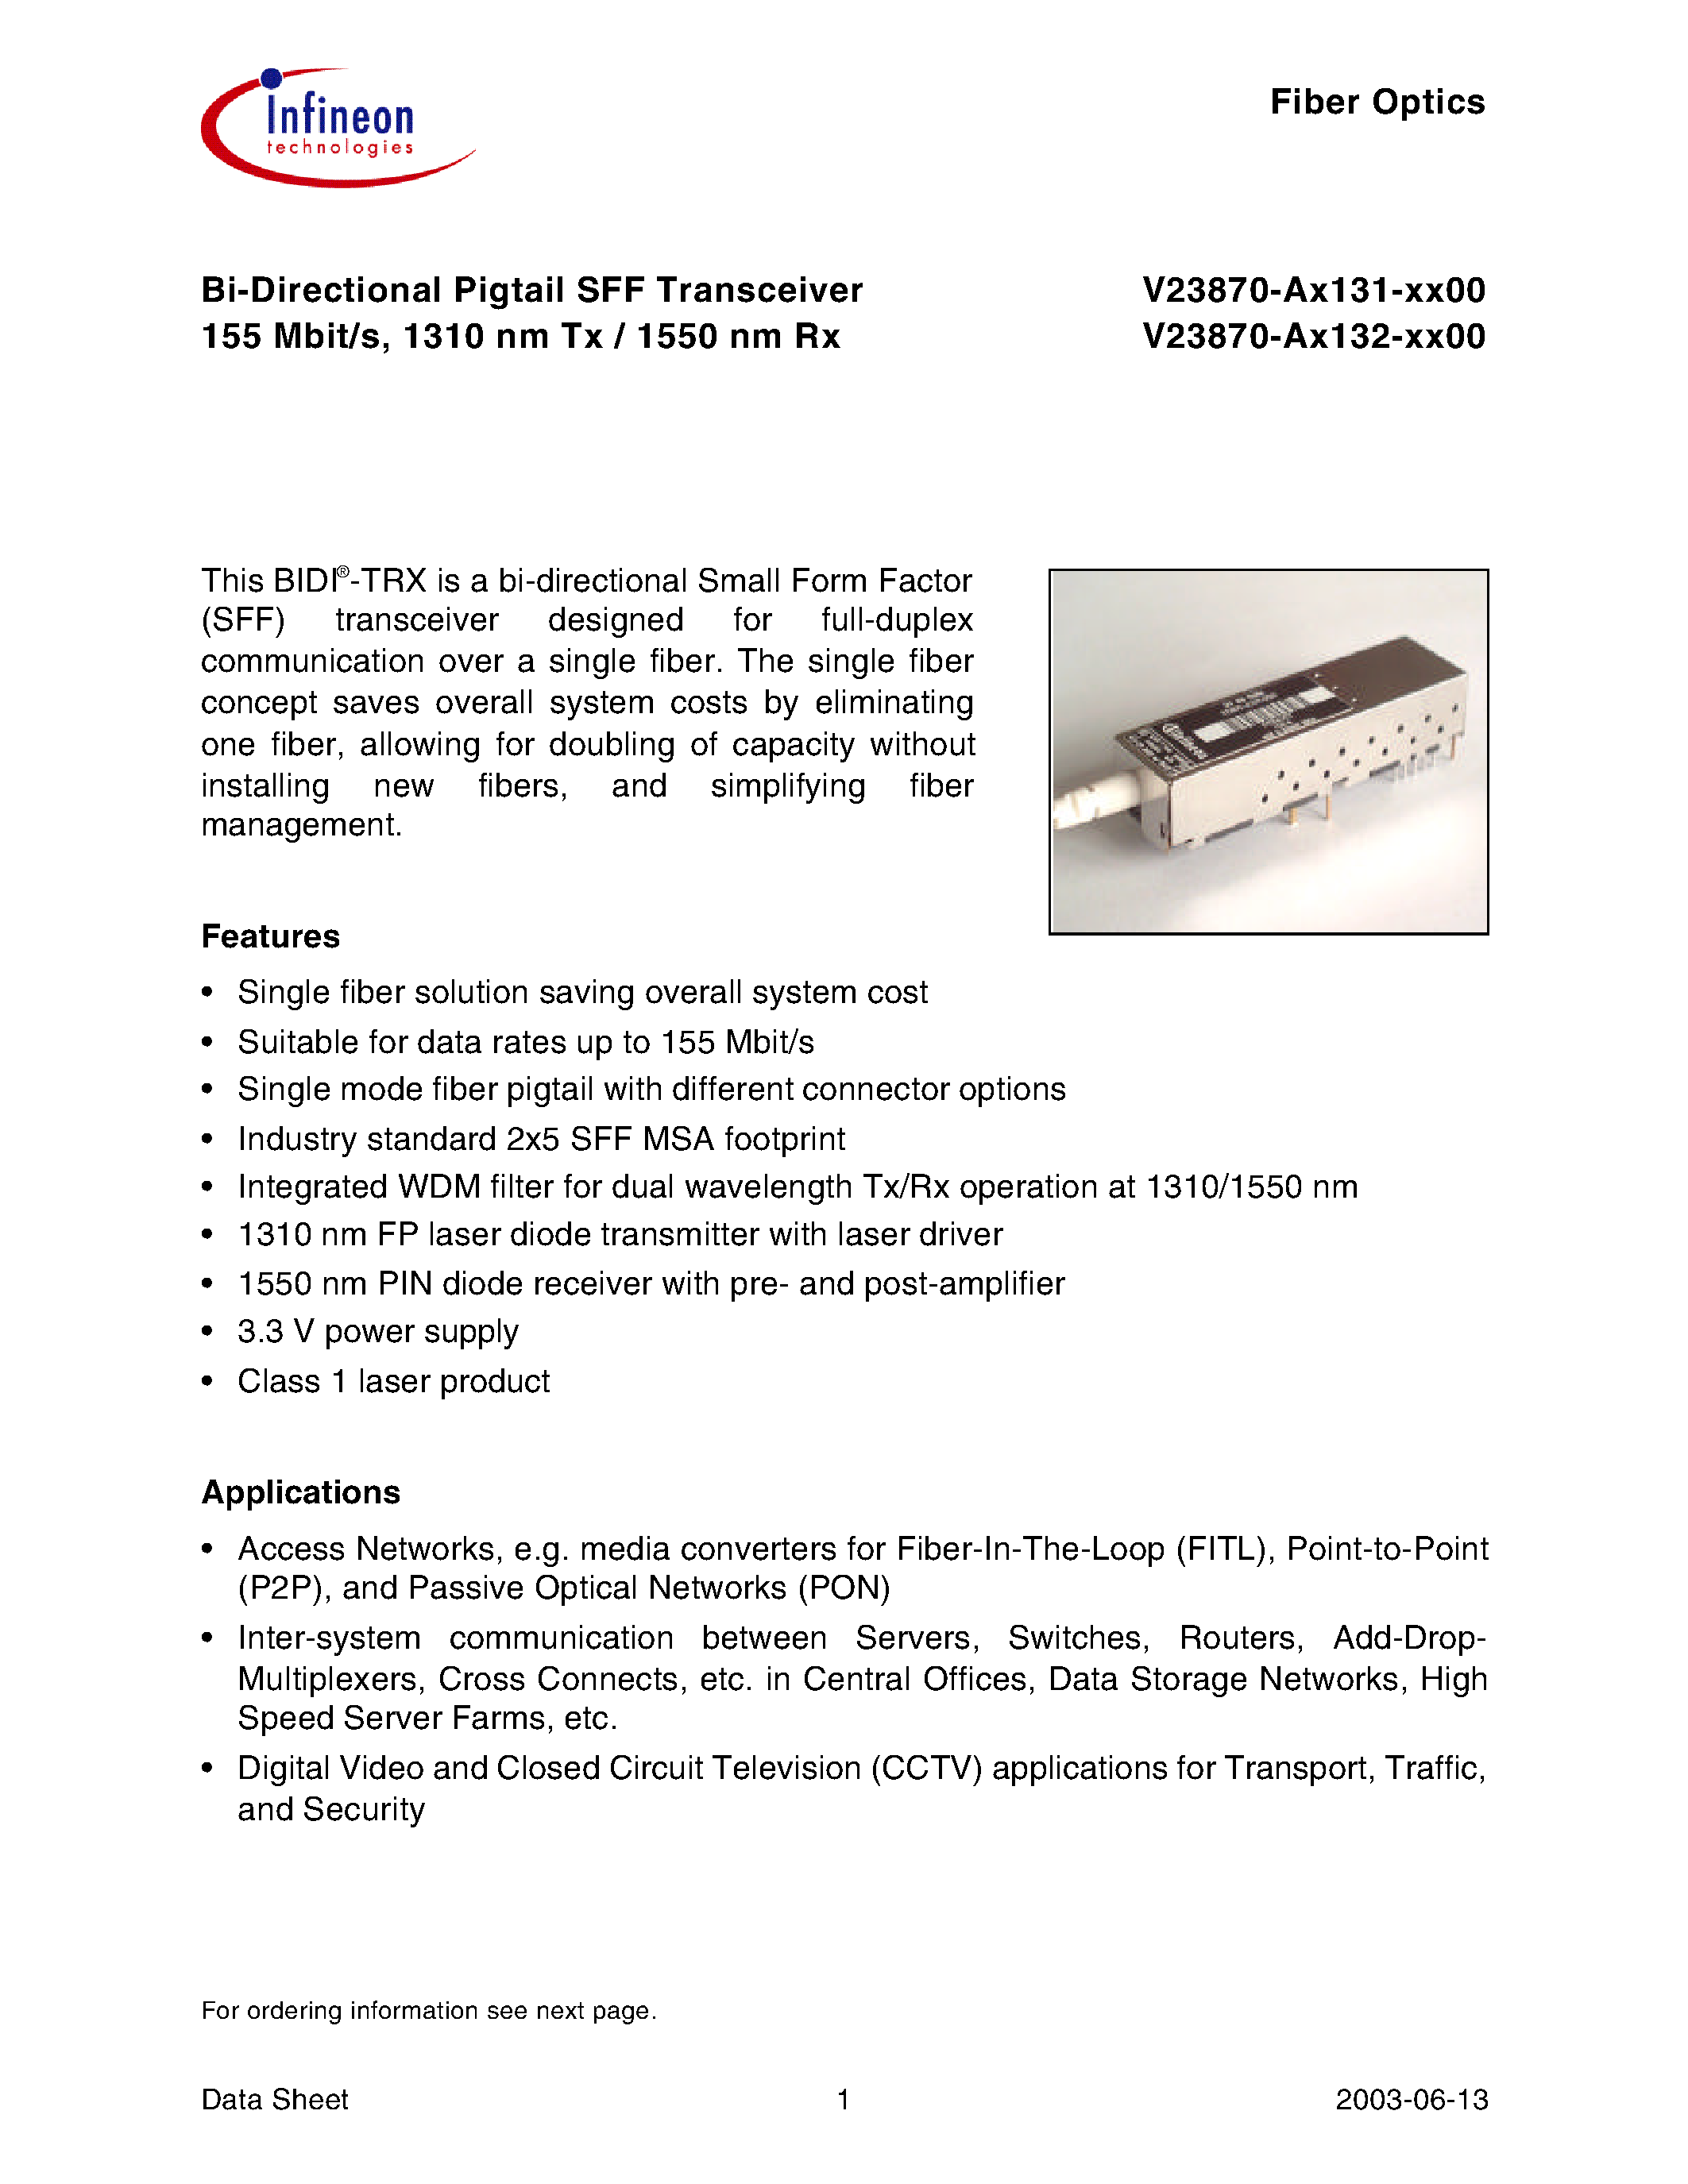 Datasheet V23870-A3132-A100 - Bi-Directional Pigtail SFF Transceiver 155 Mbit/s/ 1310 nm Tx / 1550 nm Rx page 1